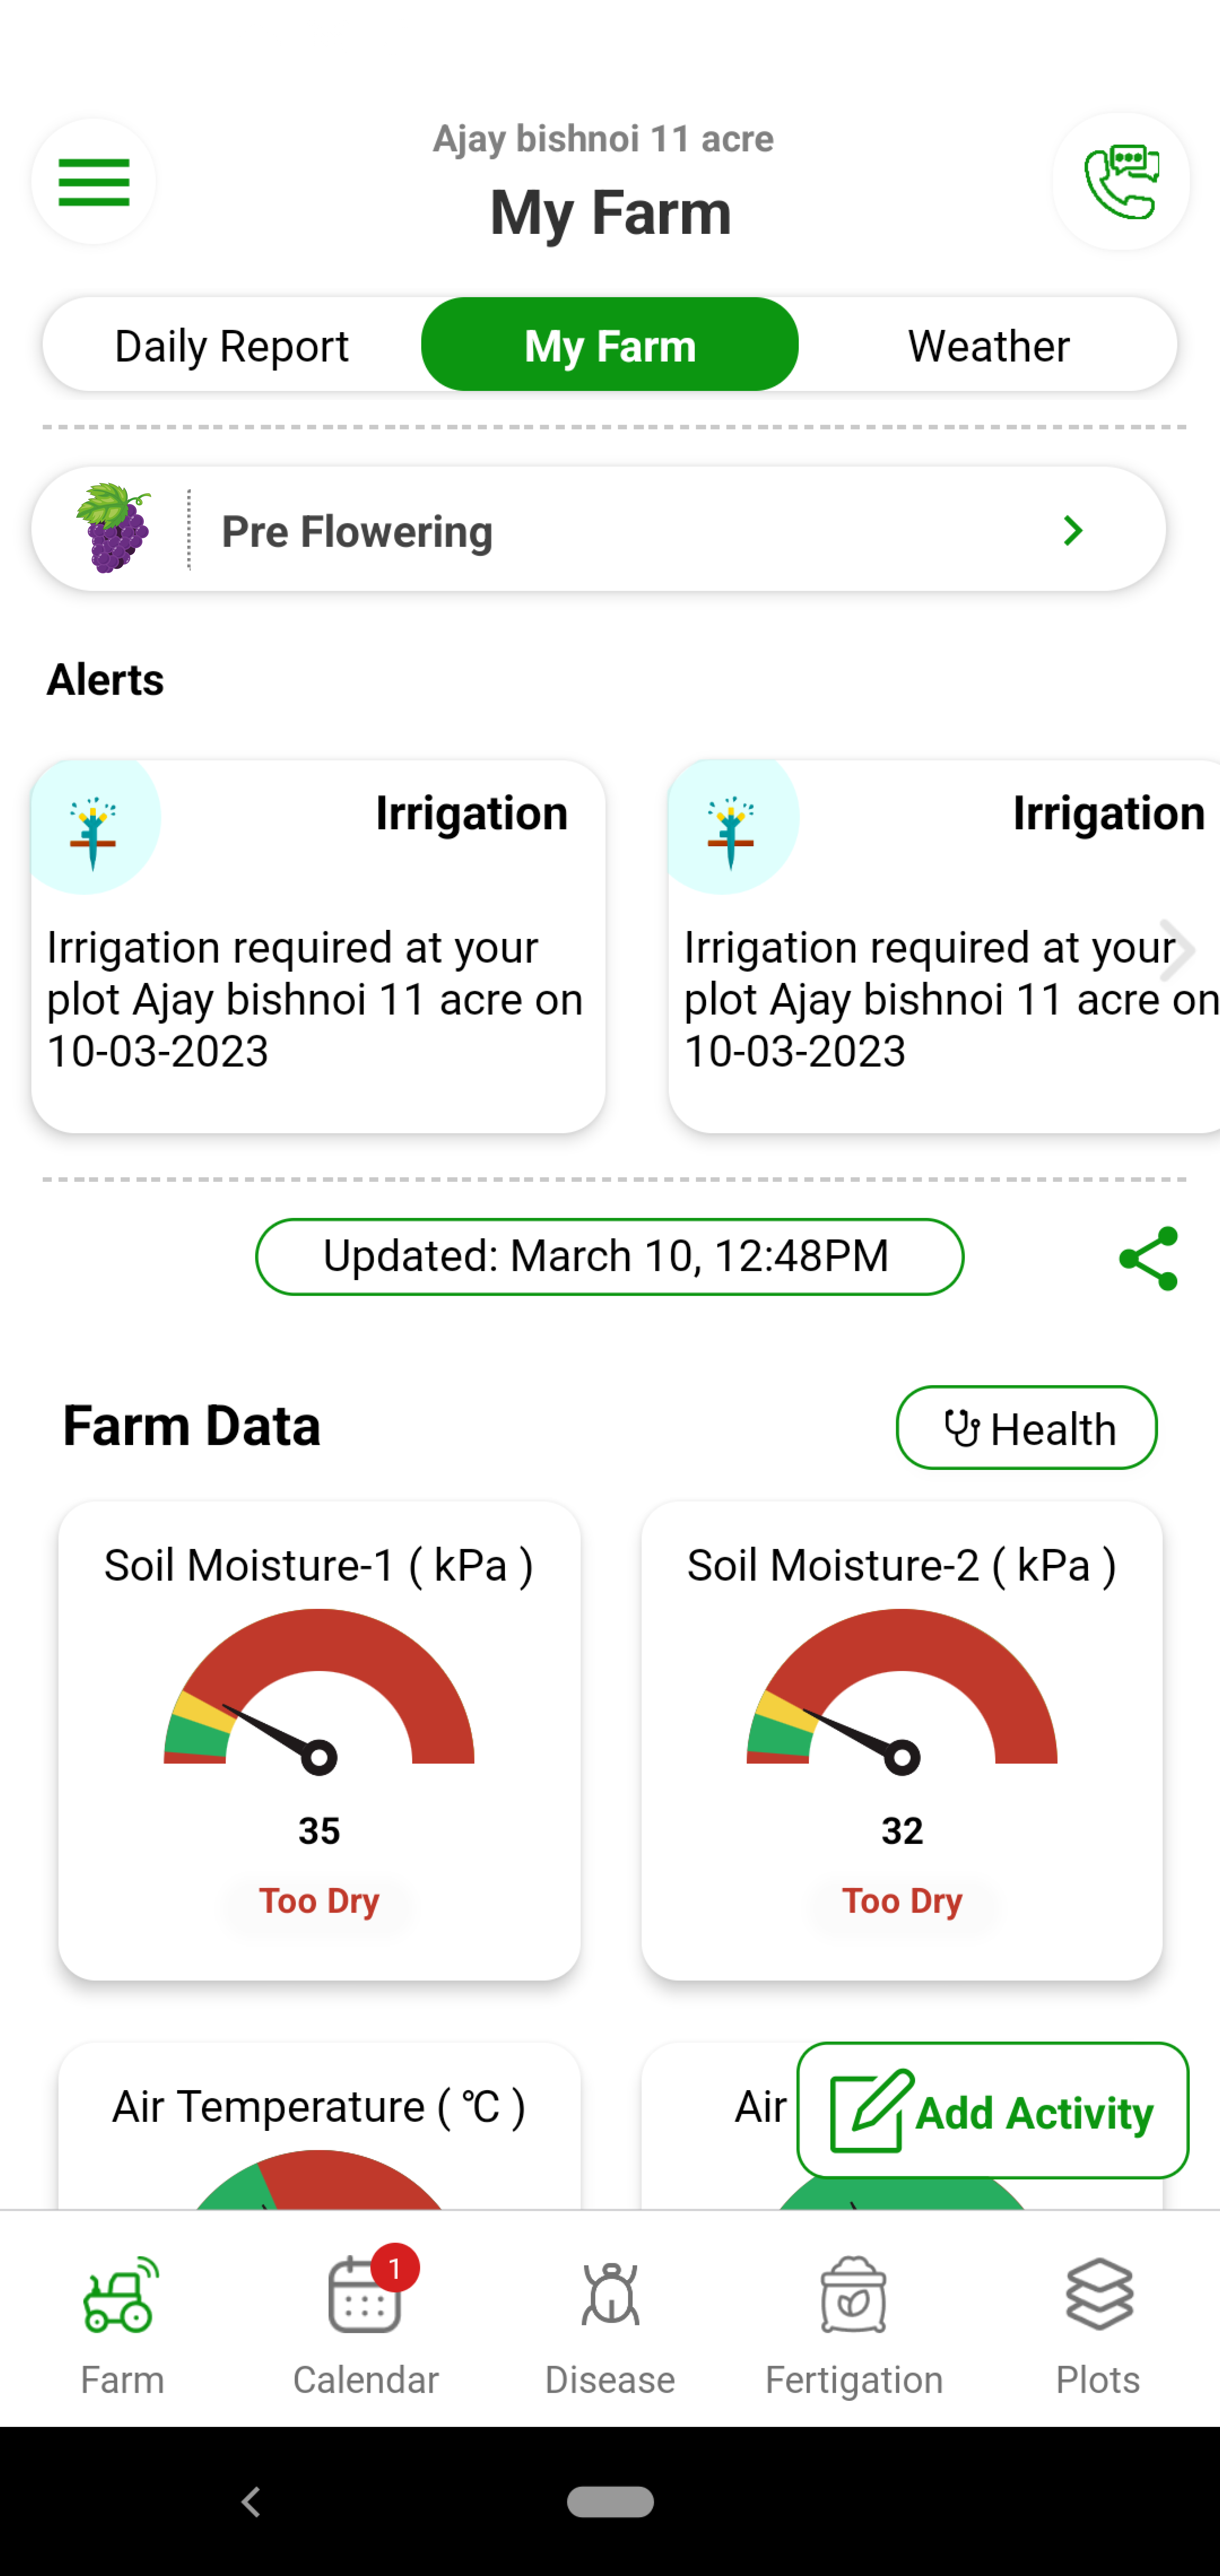 Grape’s water requirements vary based on soil type and stage. Table grape, vine grapes and raisin varieties all have different water requirements. With Fyllo’s device containing soil moisture and soil temperature sensor and intelligent software, you get alerts on how much water to provide to the crop. You can also see and visualize evapotranspiration (Etc) values of the crop .